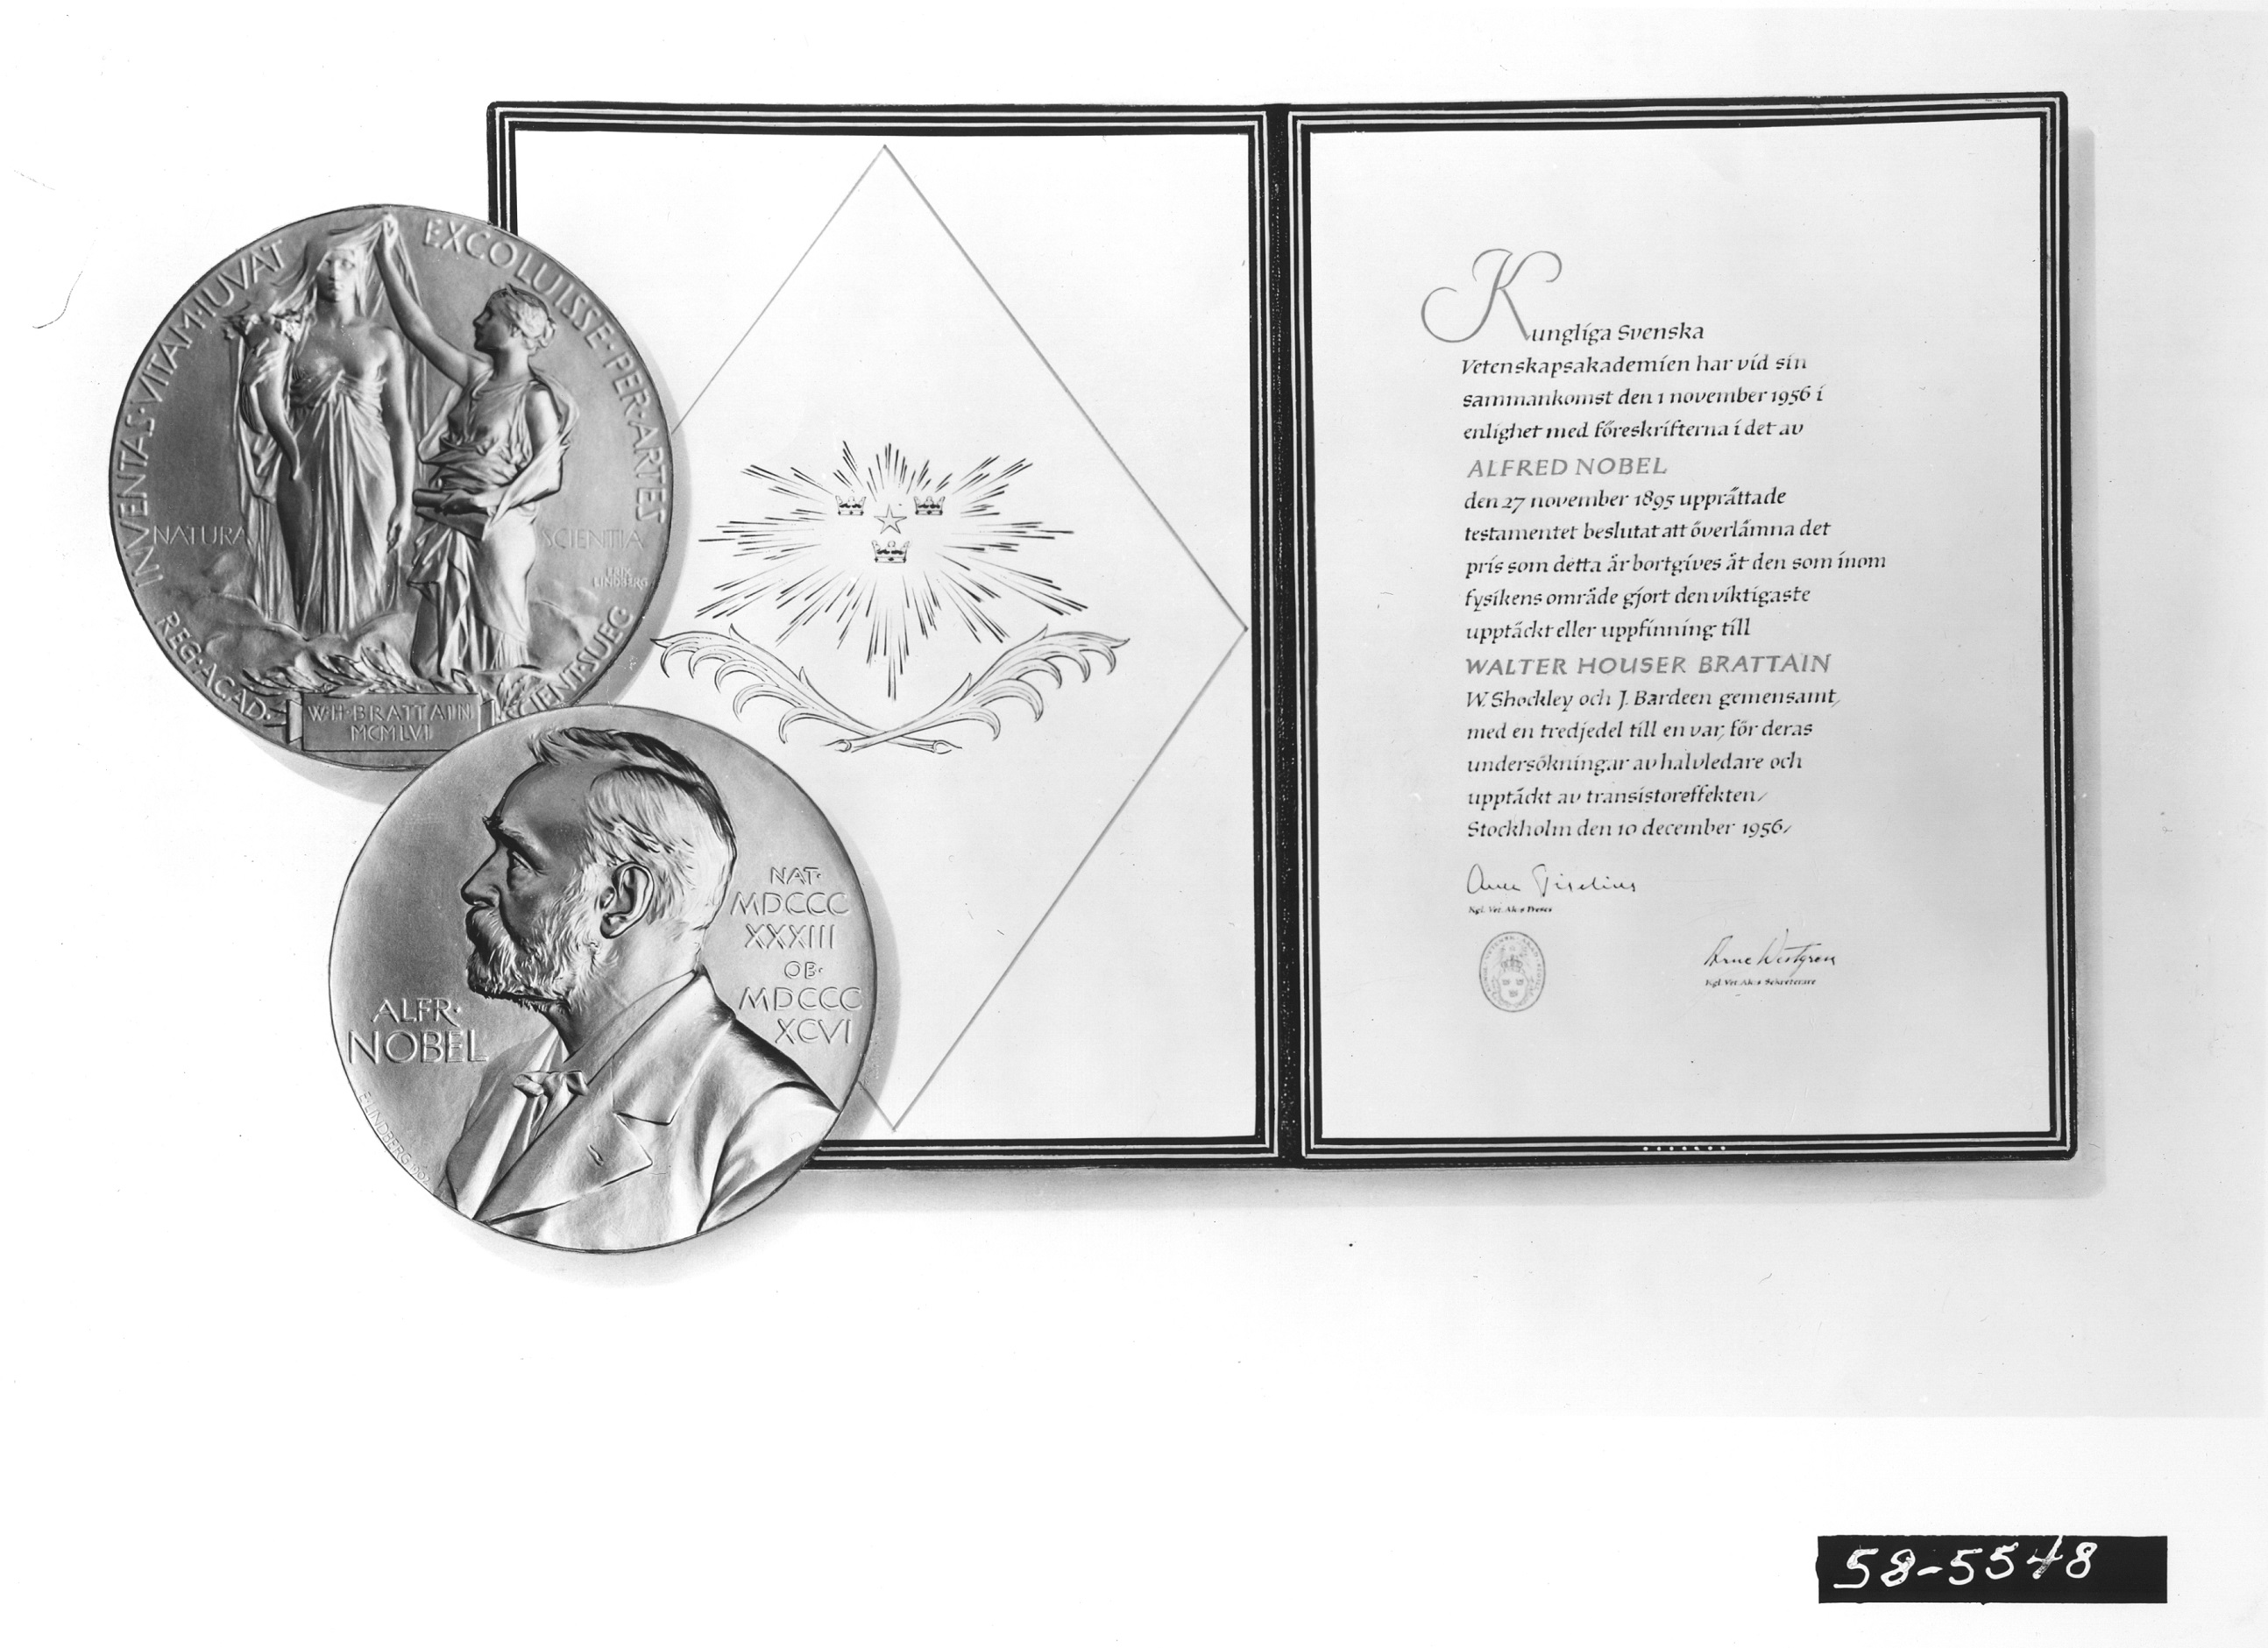 Citation and Medal Presented to Walter H. Brattain, 1956